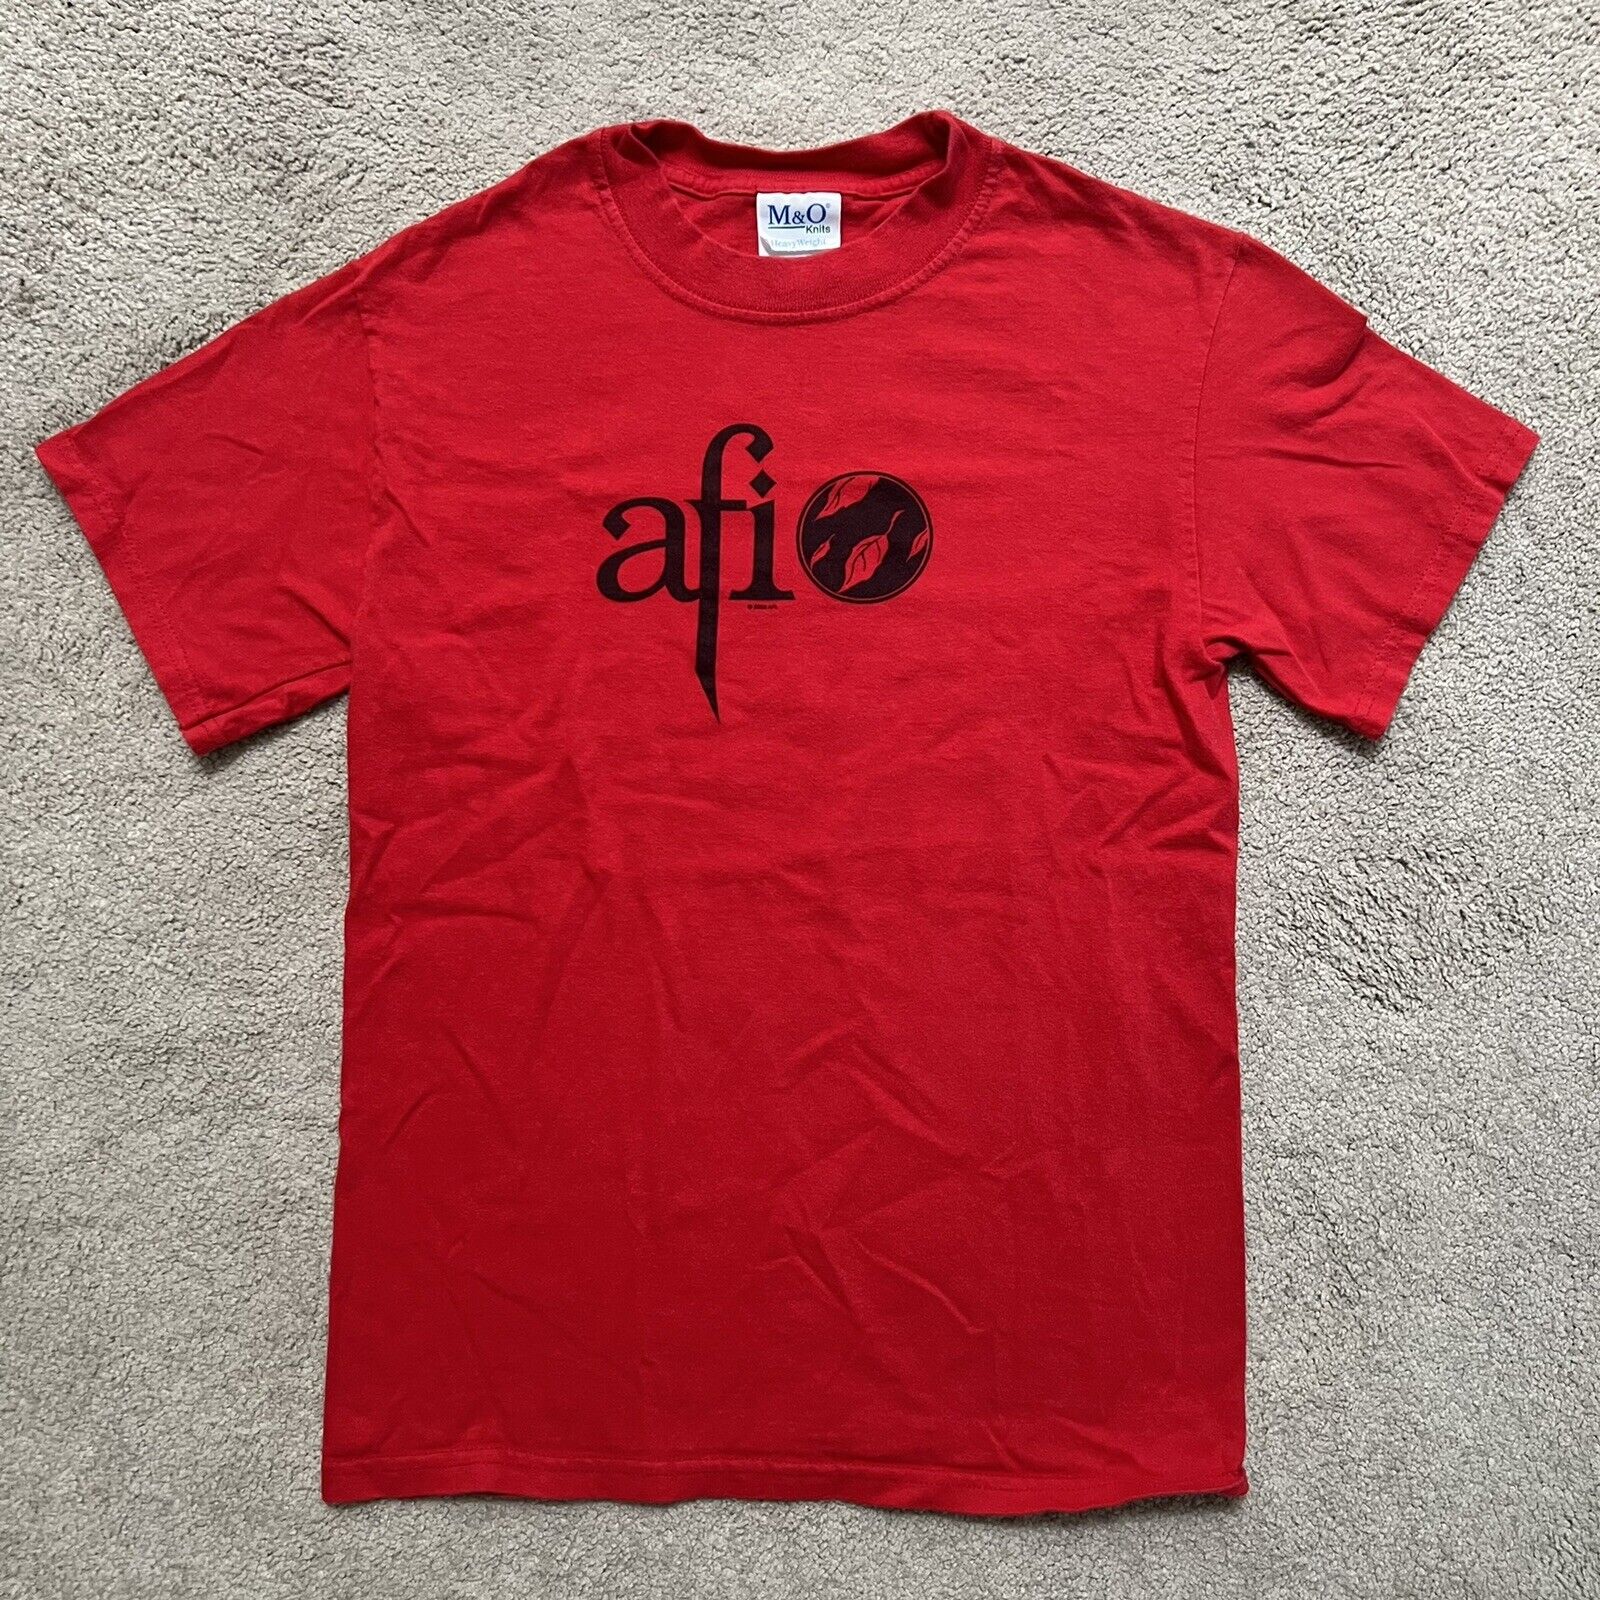 Afi Shirt Death Of Spring Tour 2003 Sing The Sorrow Adult Small Vintage Used